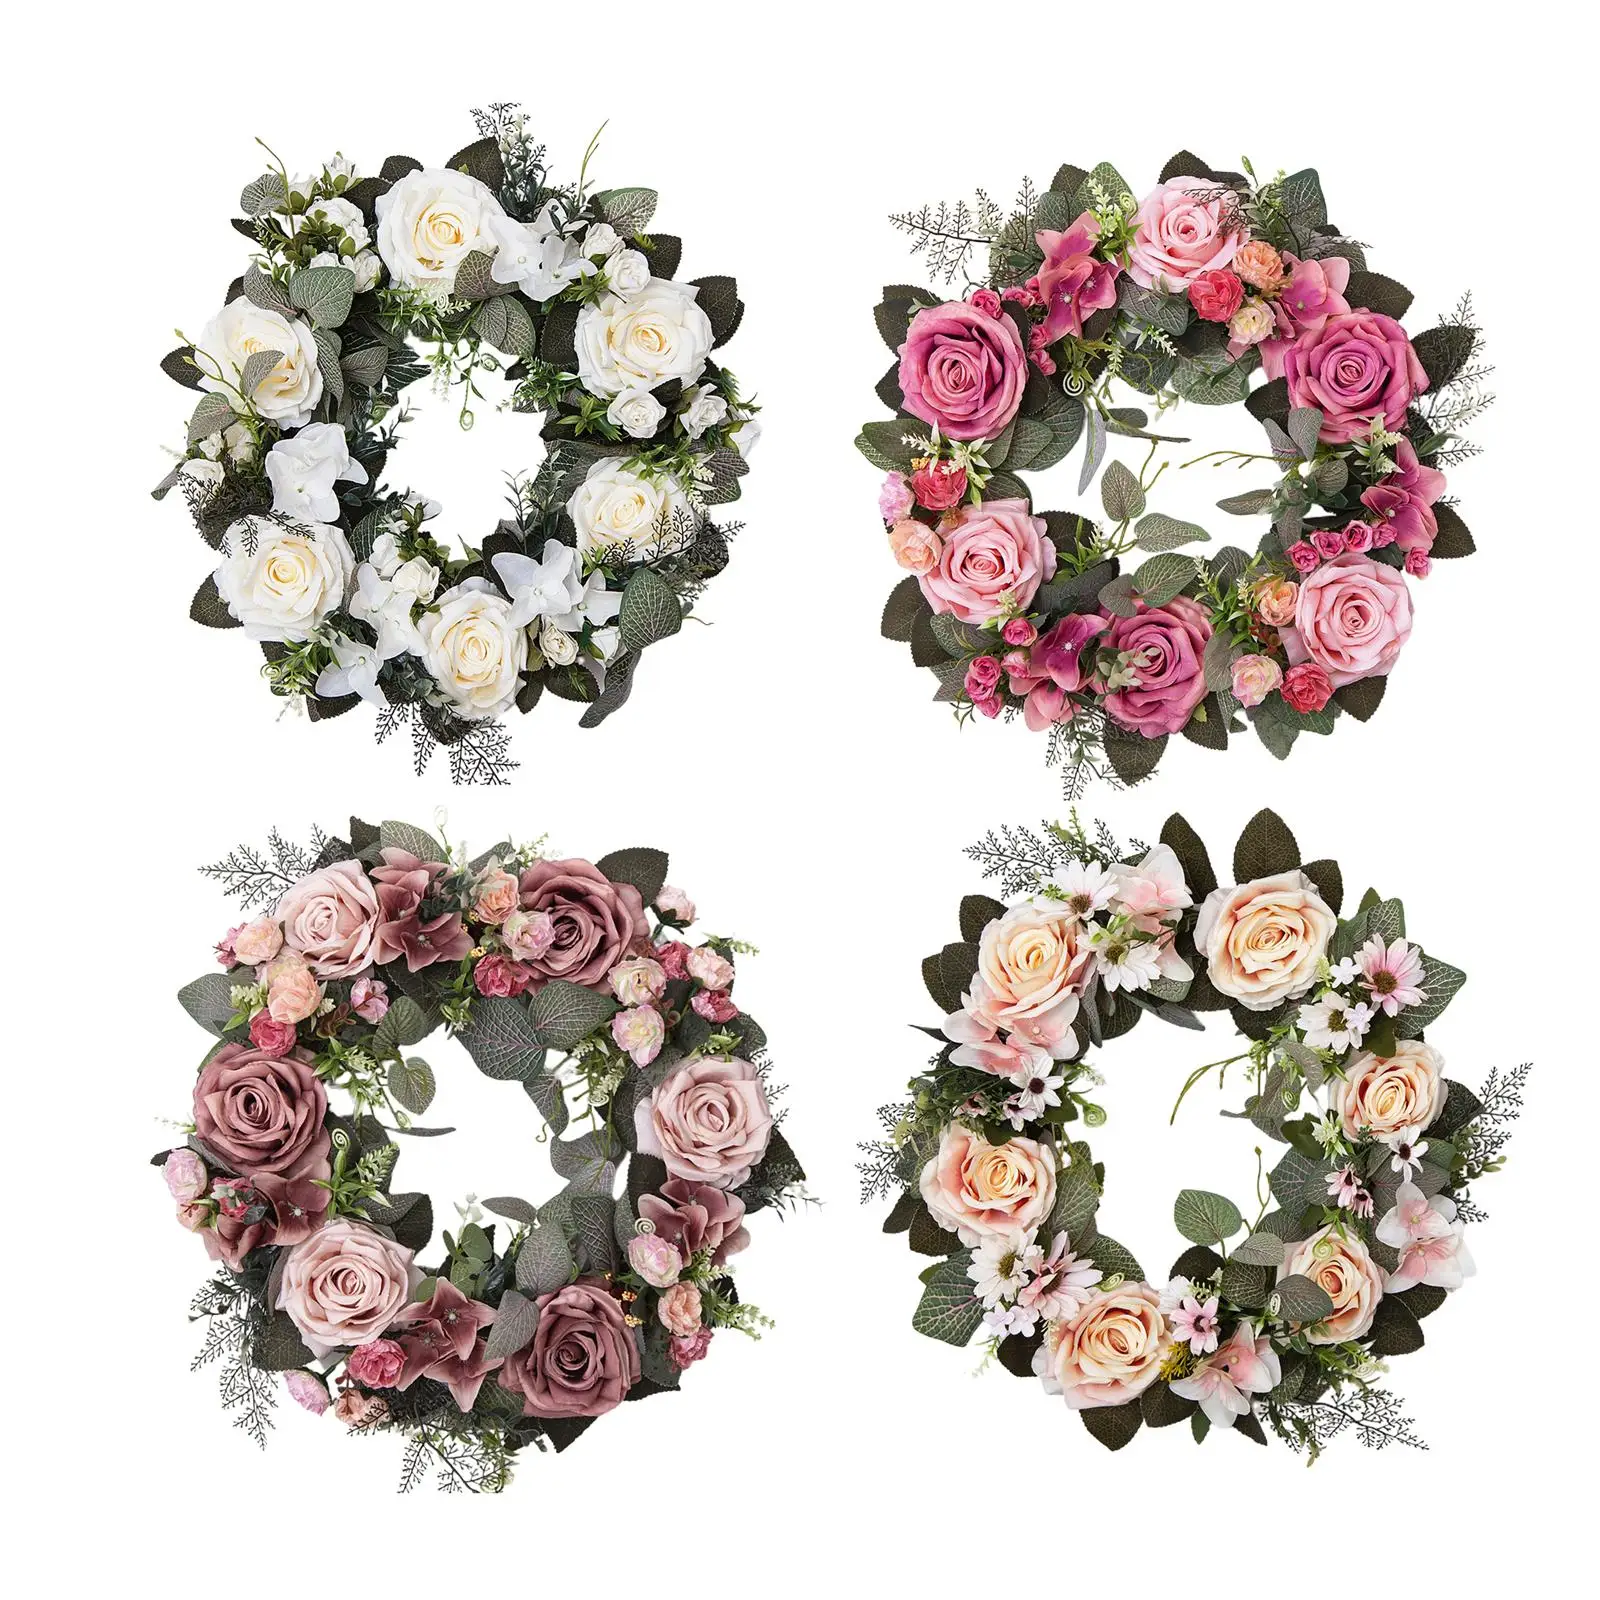 Handmade Artificial Wreath Photography Props Garland Hanging Wreath Floral Swag for Party Window Home Farmhouse Decor